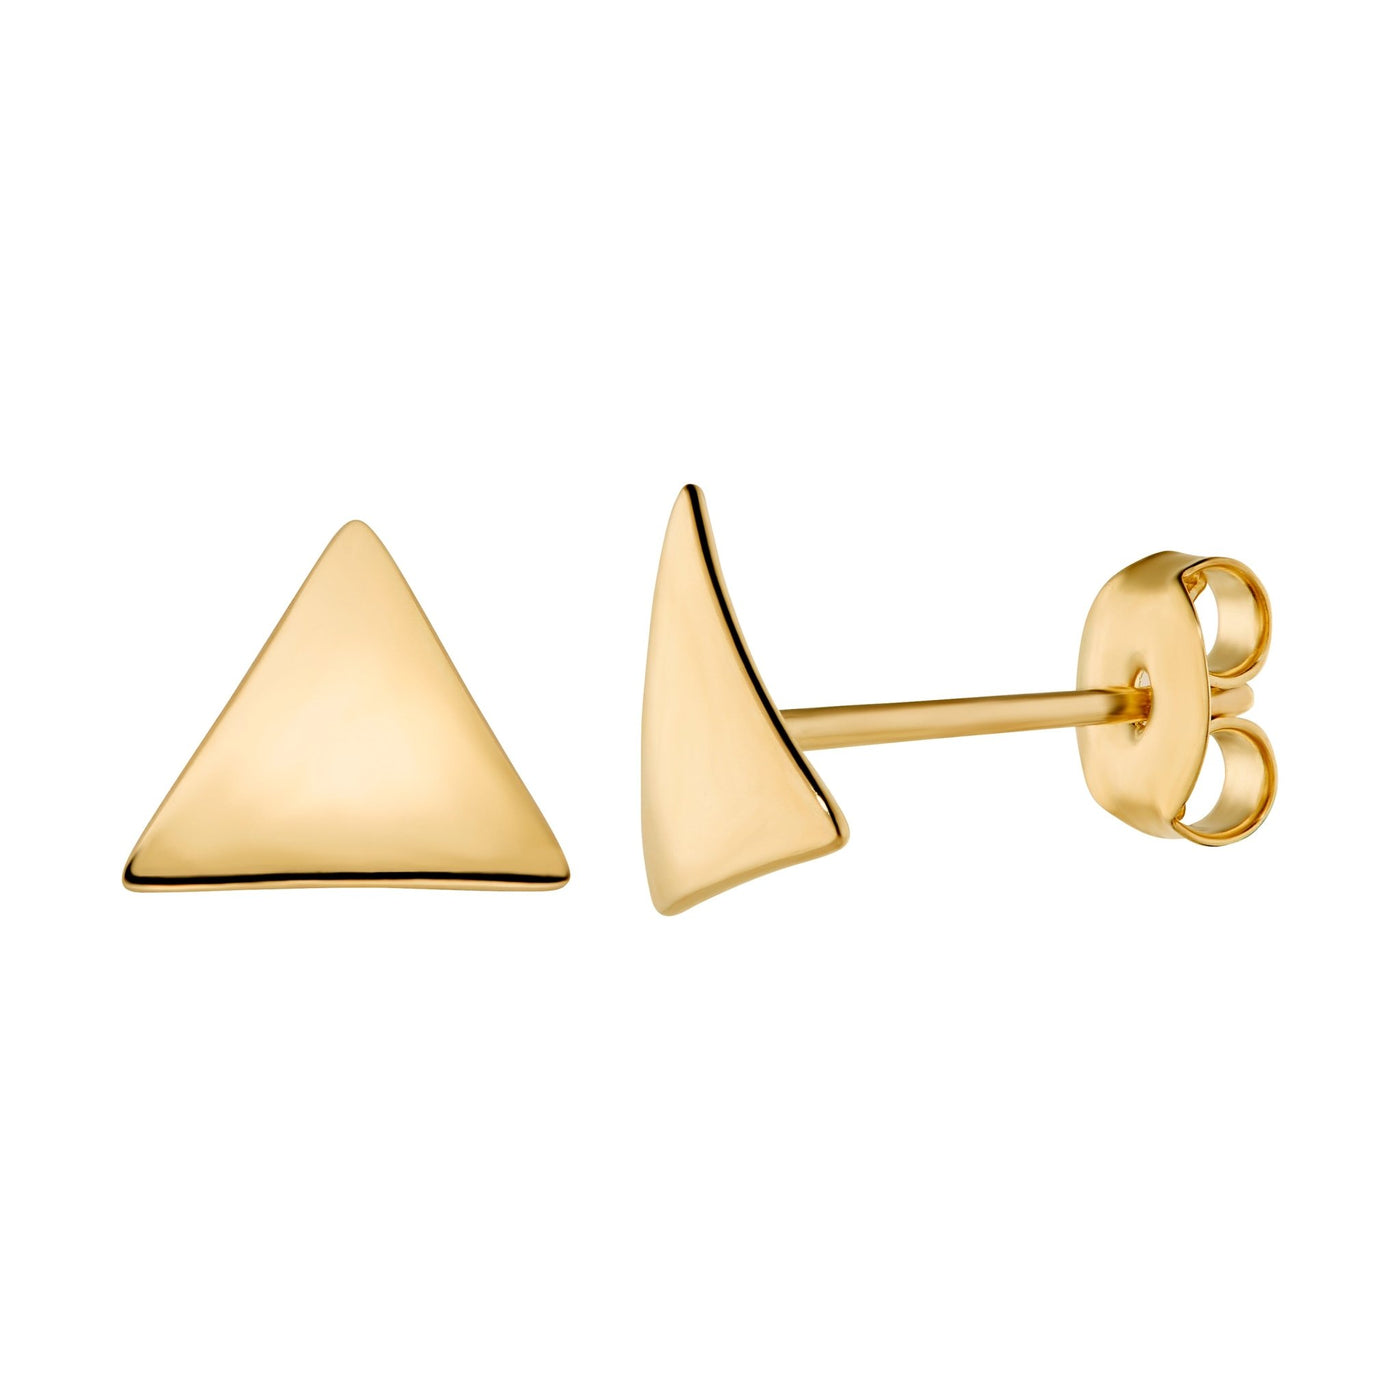 EARRING TRIANGLE PAIR 333 GOLD - IDENTIM®